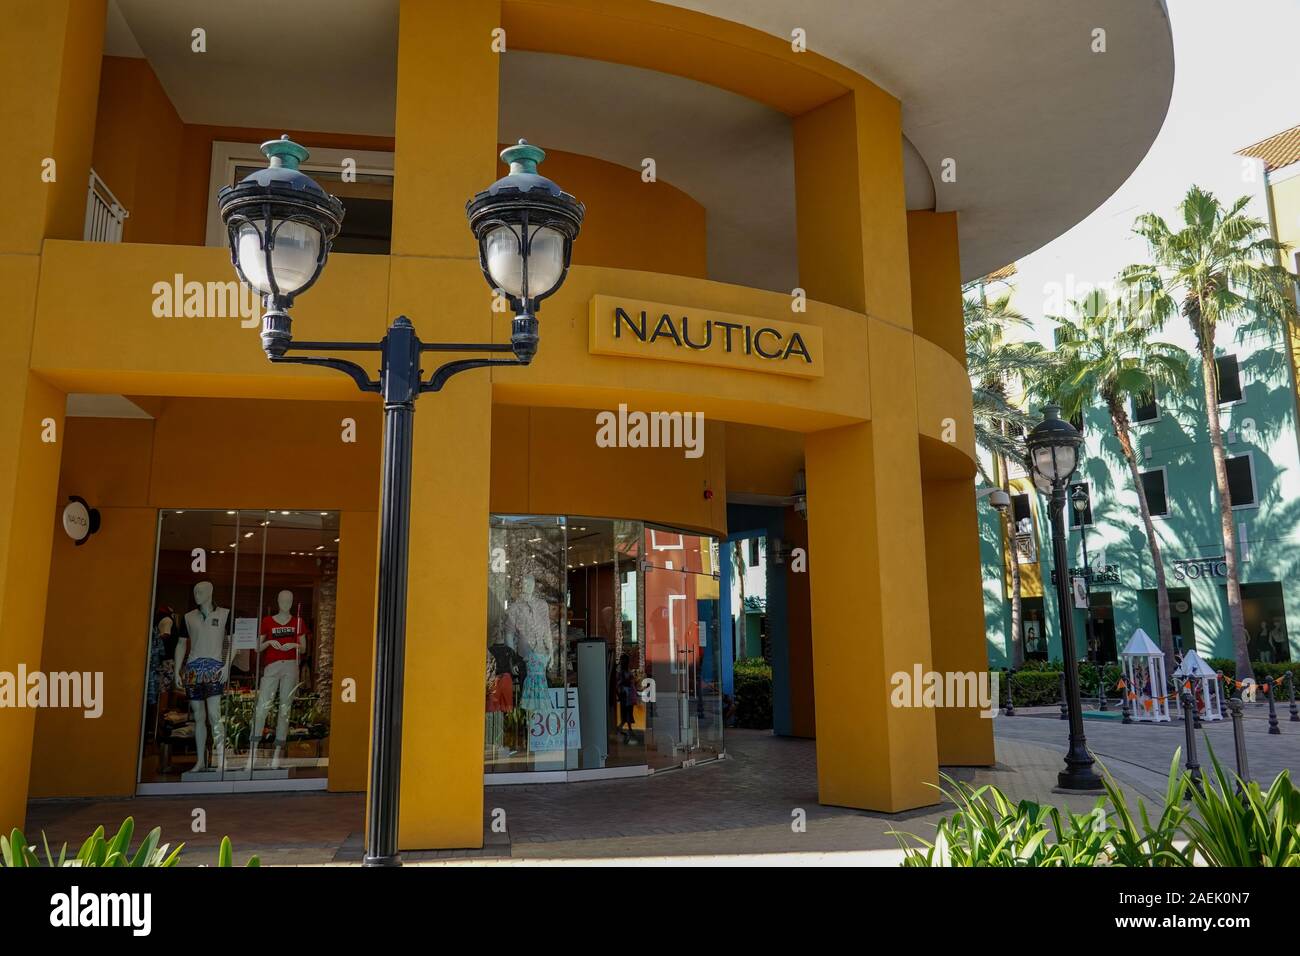 https://c8.alamy.com/comp/2AEK0N7/curacao-11319-nautica-retail-clothing-store-storefront-in-the-shopping-district-in-curacao-2AEK0N7.jpg